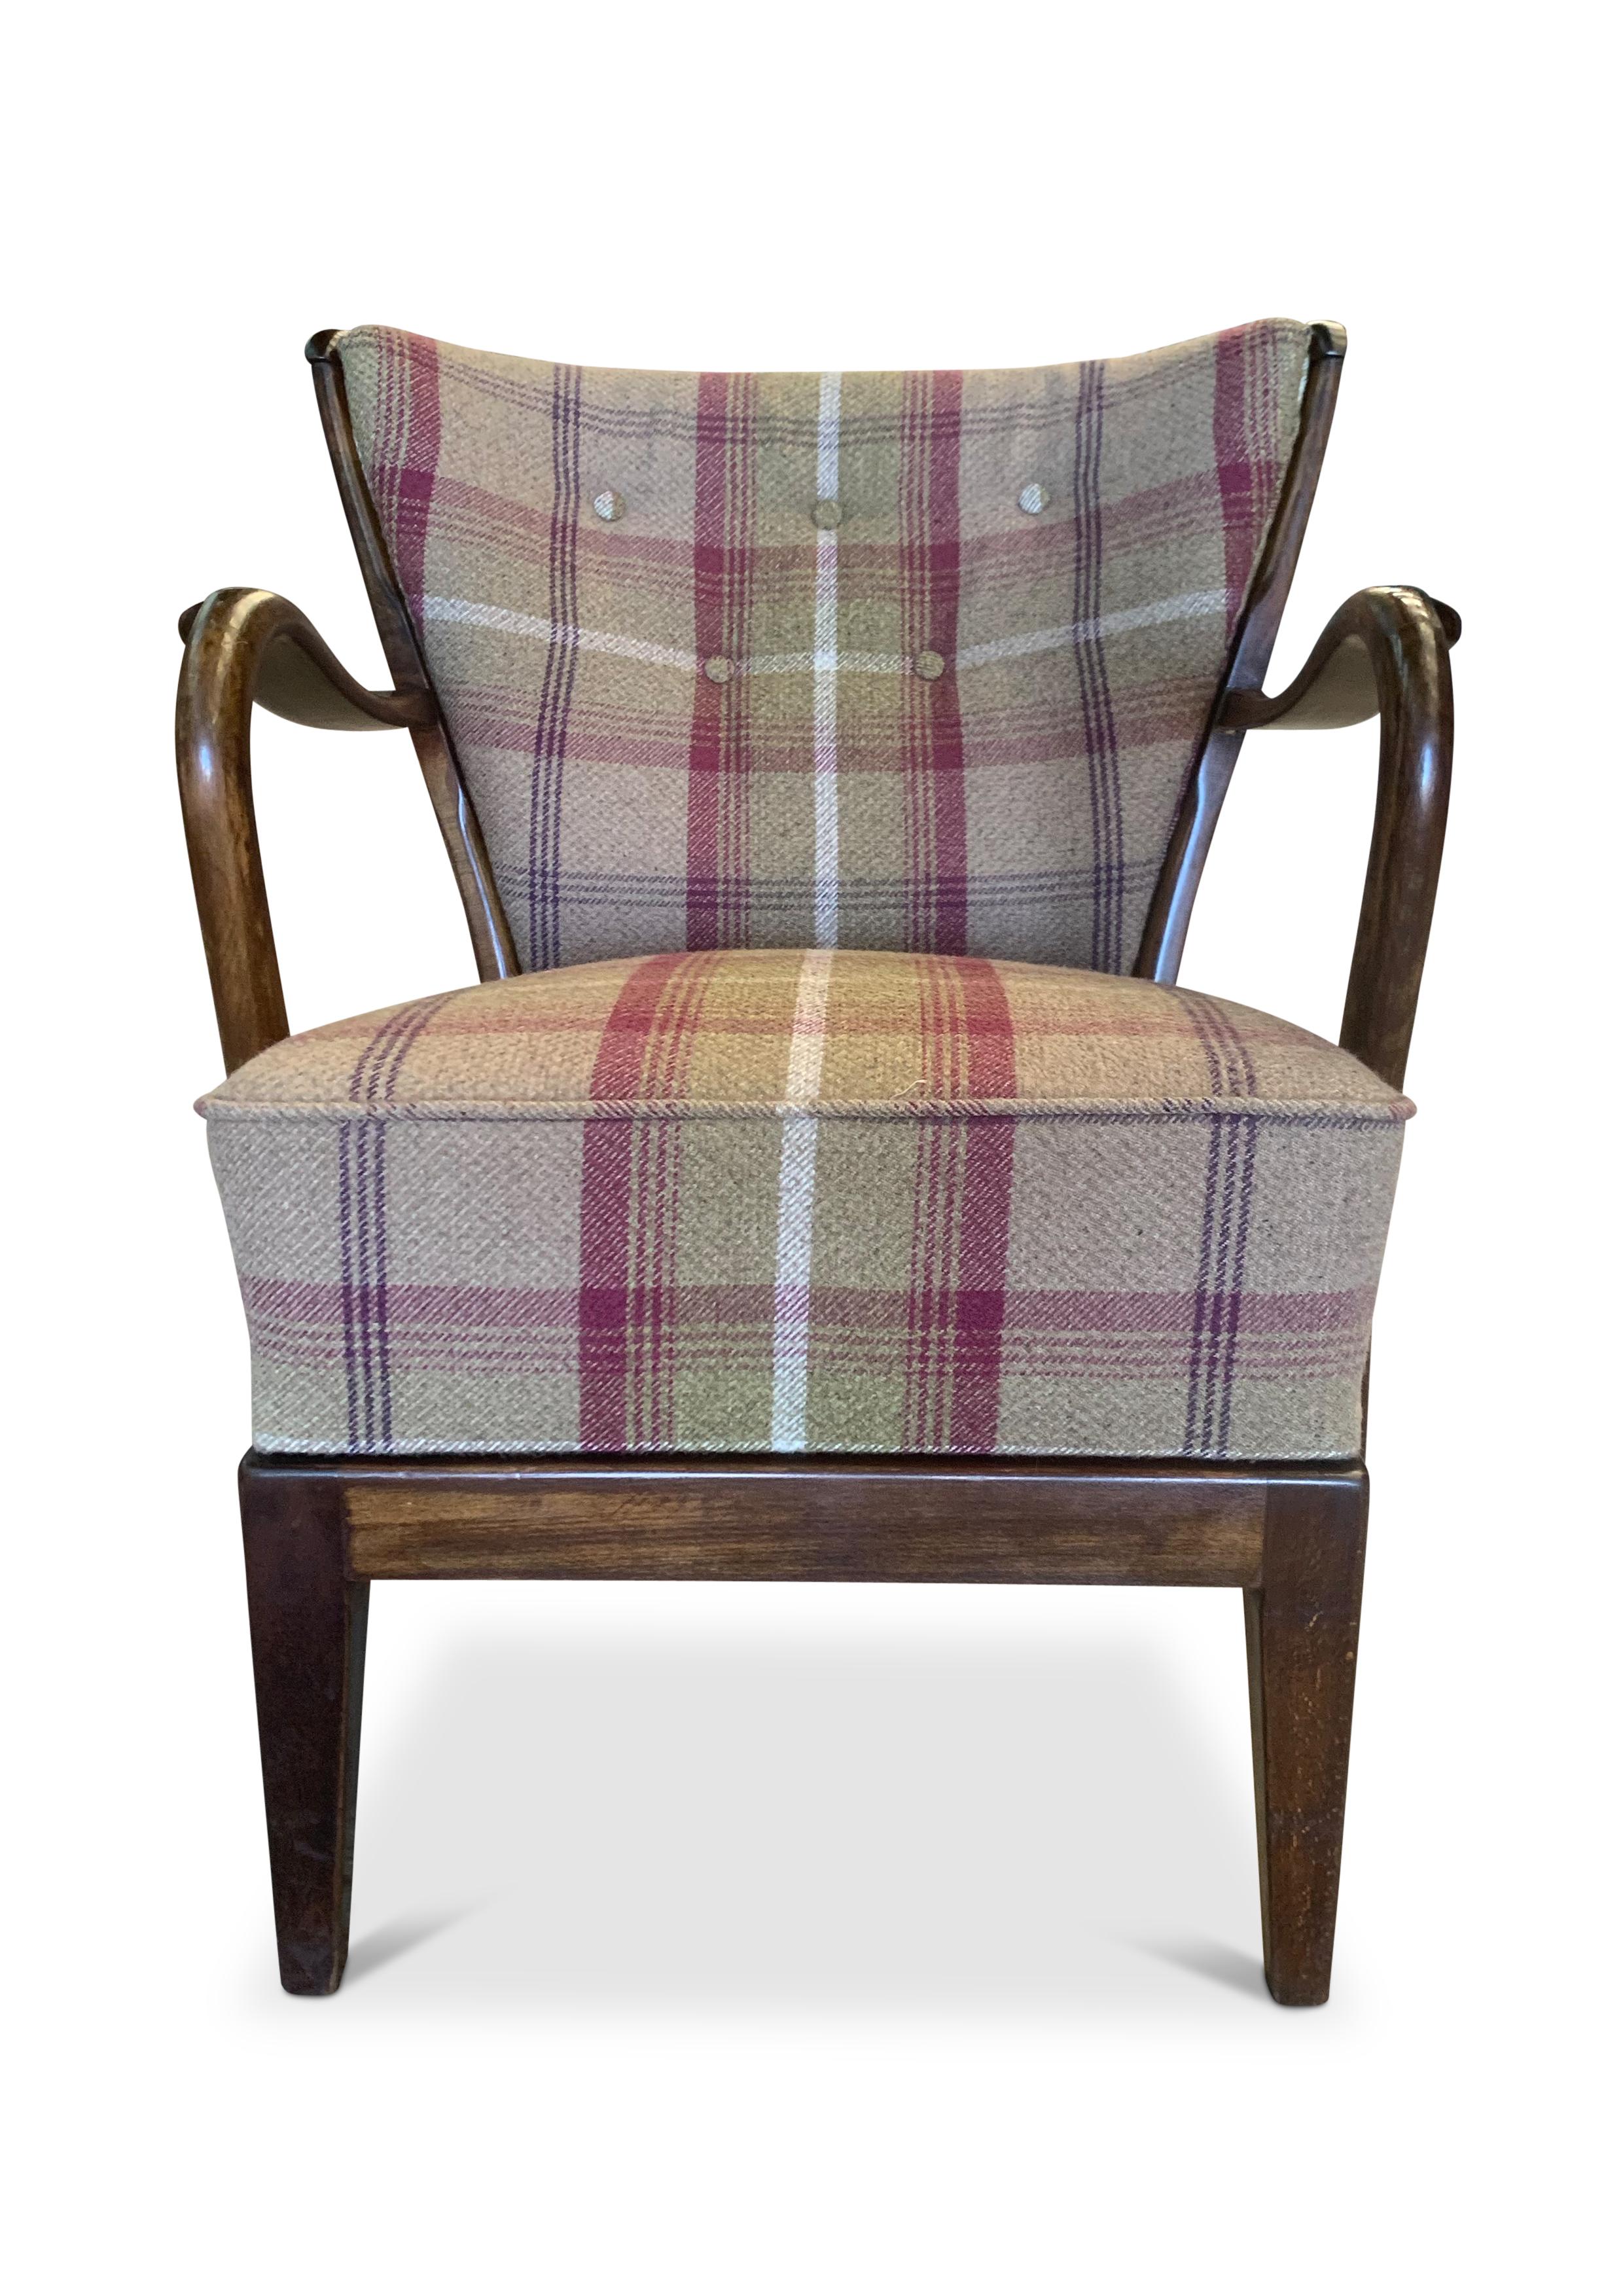 1940's Fritz Hansen Art Deco Oak Bentwood Armchair with Wool Plaid Upholstery 
Made in Denmark, No makers marks

Fritz Hansen, also known as Republic of Fritz Hansen, is a Danish furniture design company. Designers who have worked for Fritz Hansen